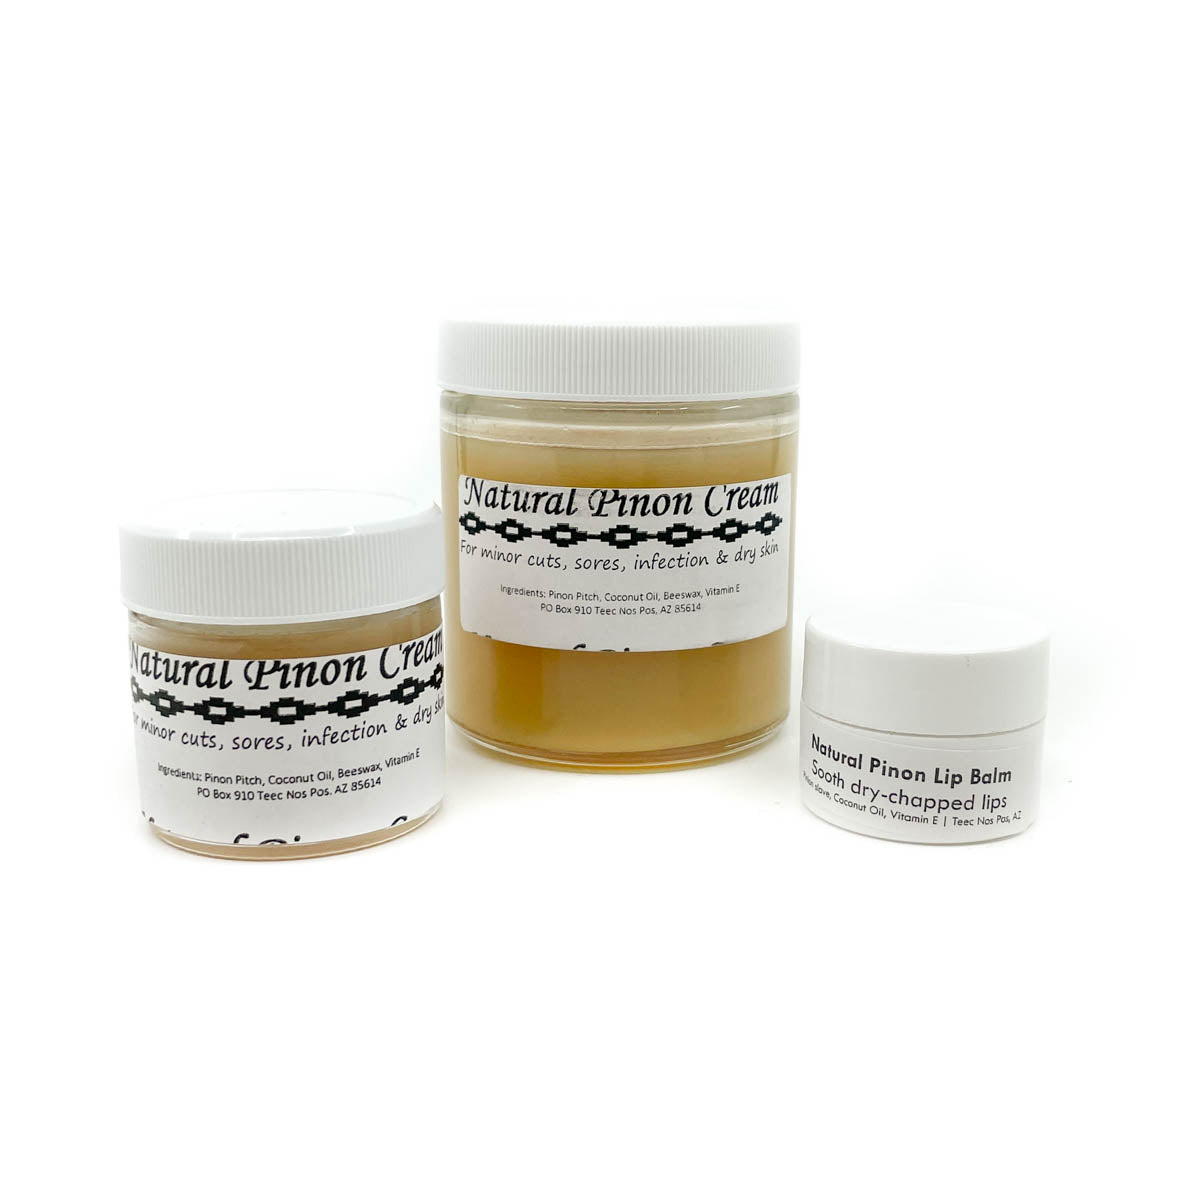 Nellie's Natural Pinon Cream - 1 oz. size (Diné) BACK IN STOCK SOON!